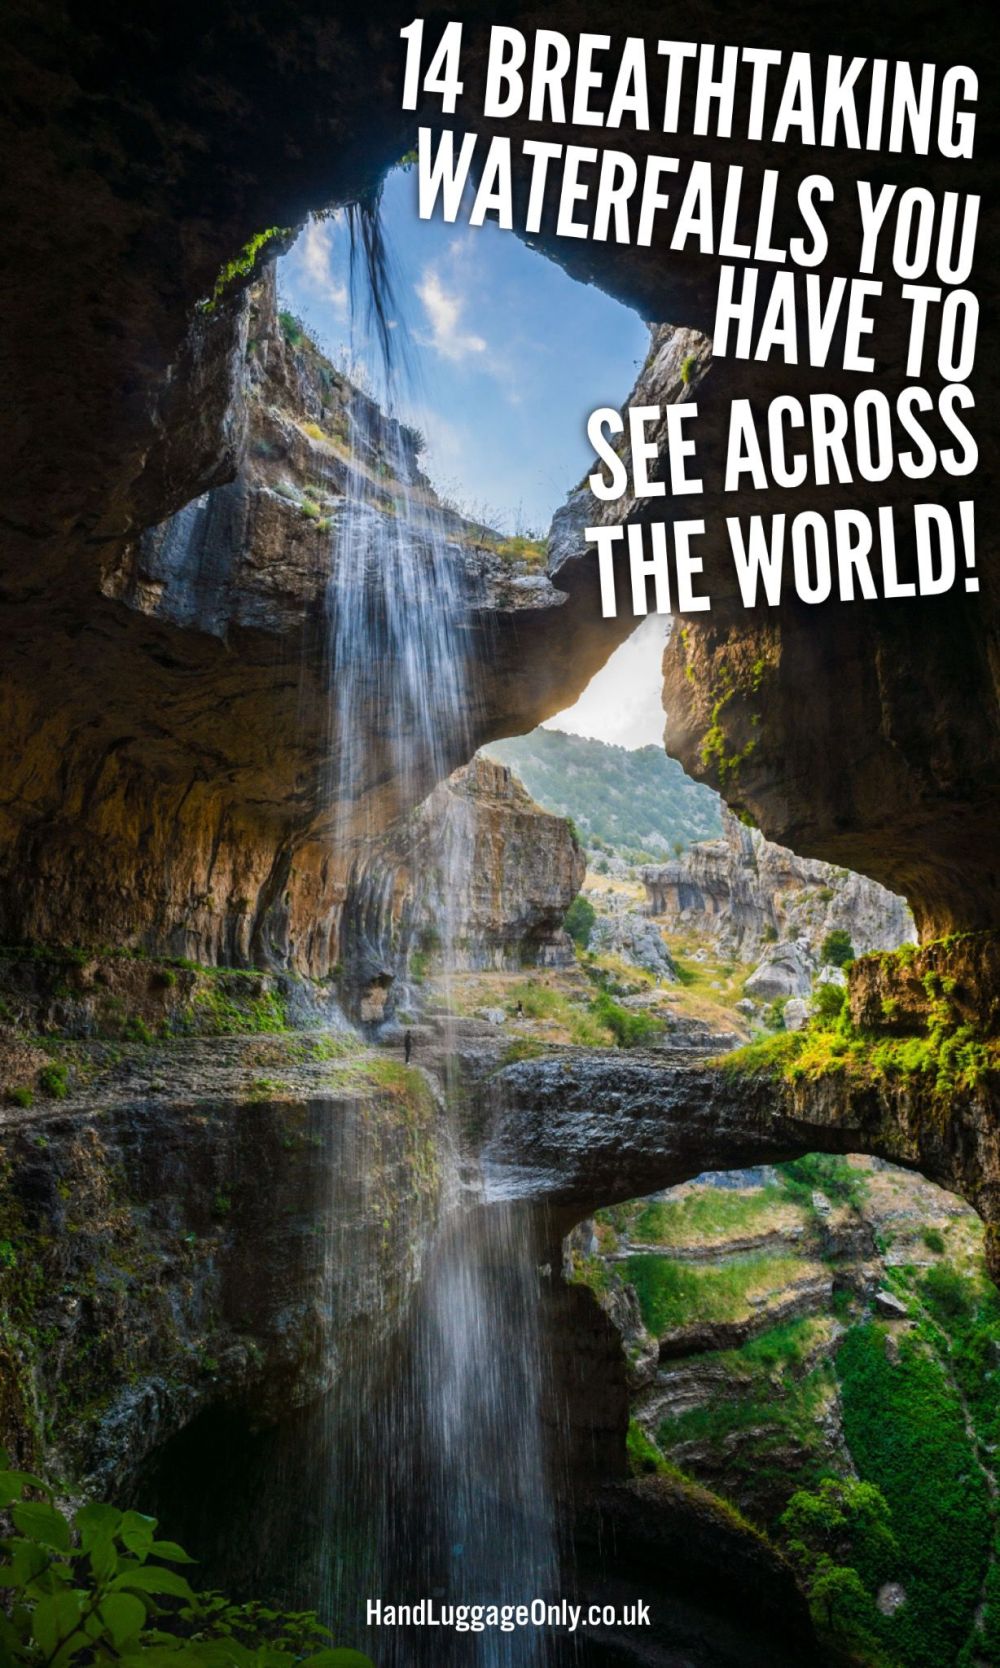 14 AMAZING WATERFALLS AROUND THE WORLD YOU HAVE TO TRAVEL TO SEE!